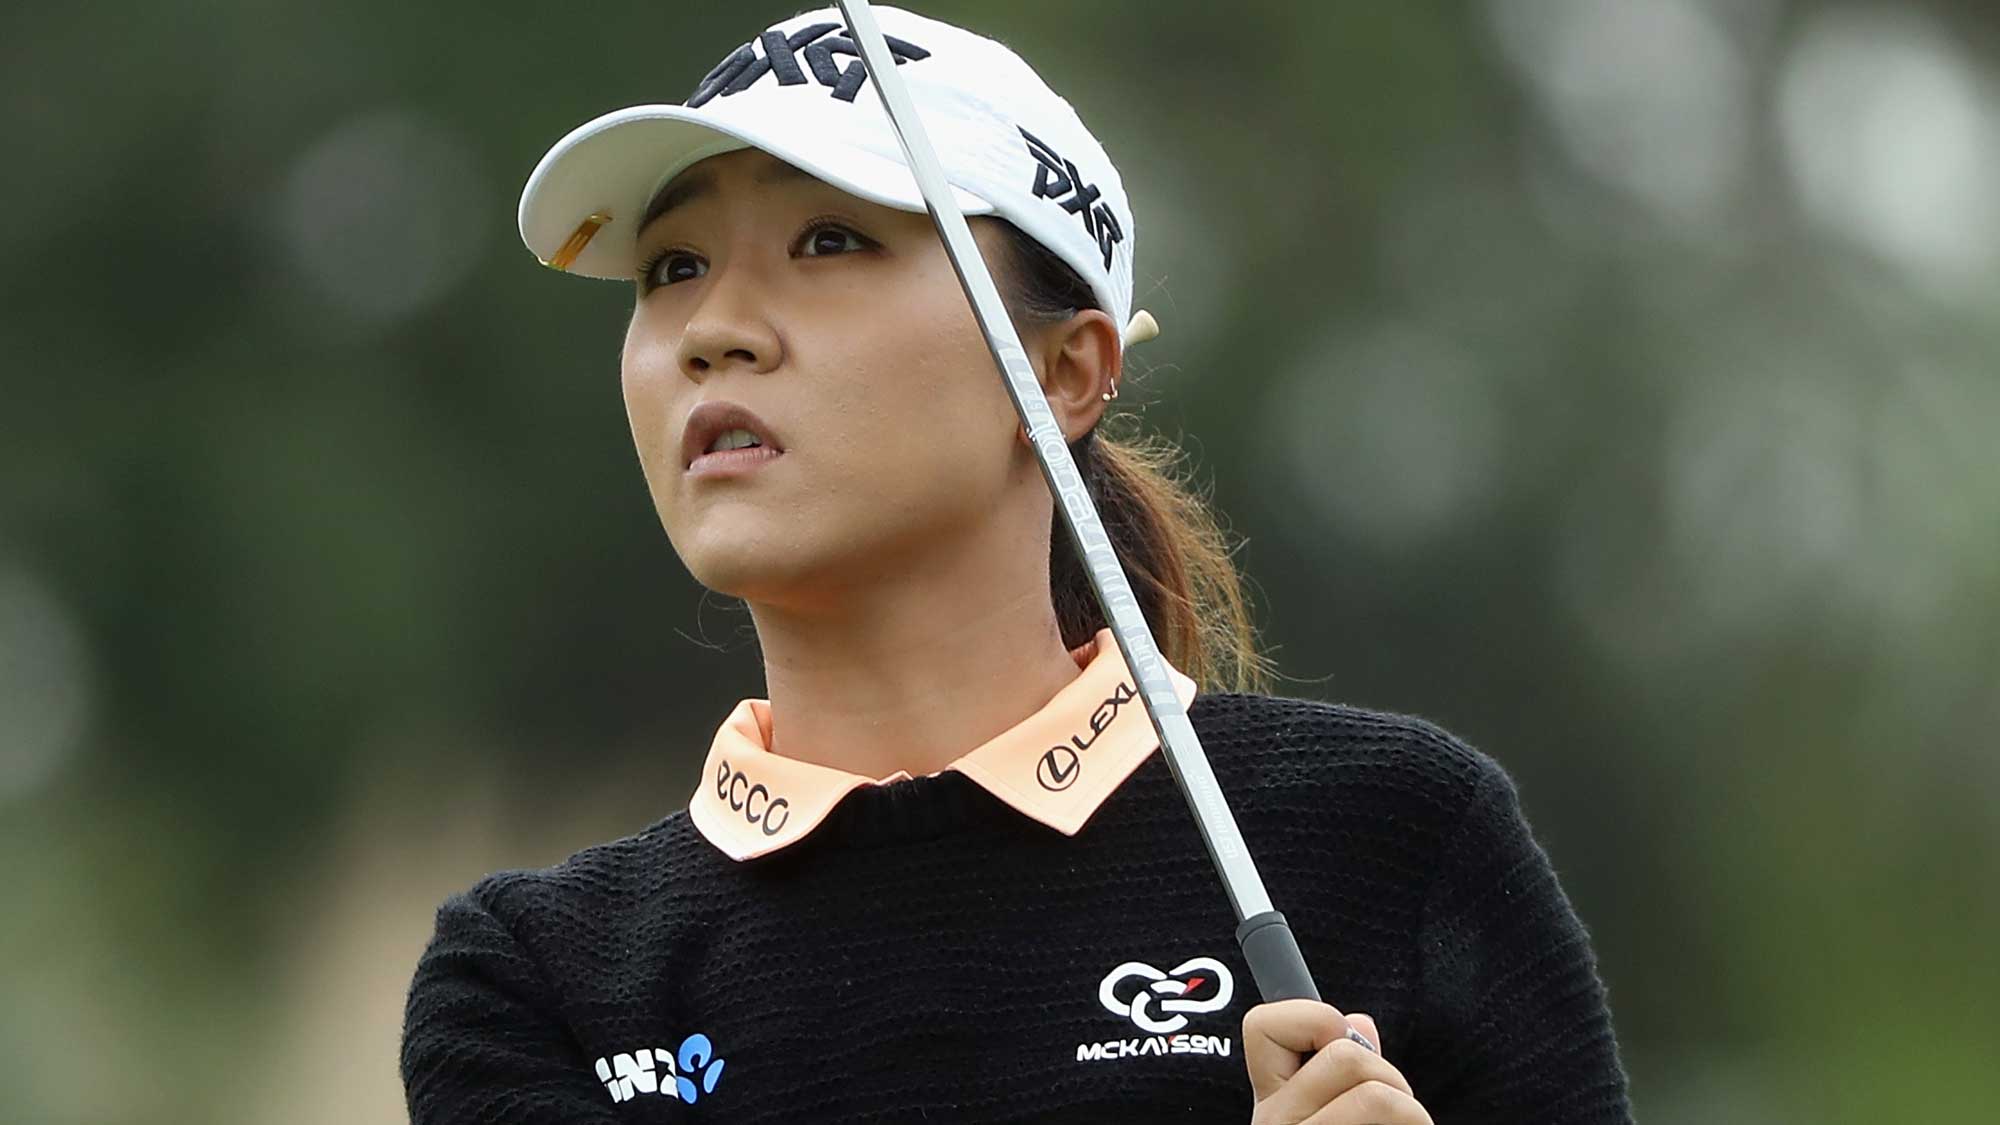 Lydia Ko of New Zealand plays a shot on the second hole during round one of the CME Group Tour Championship